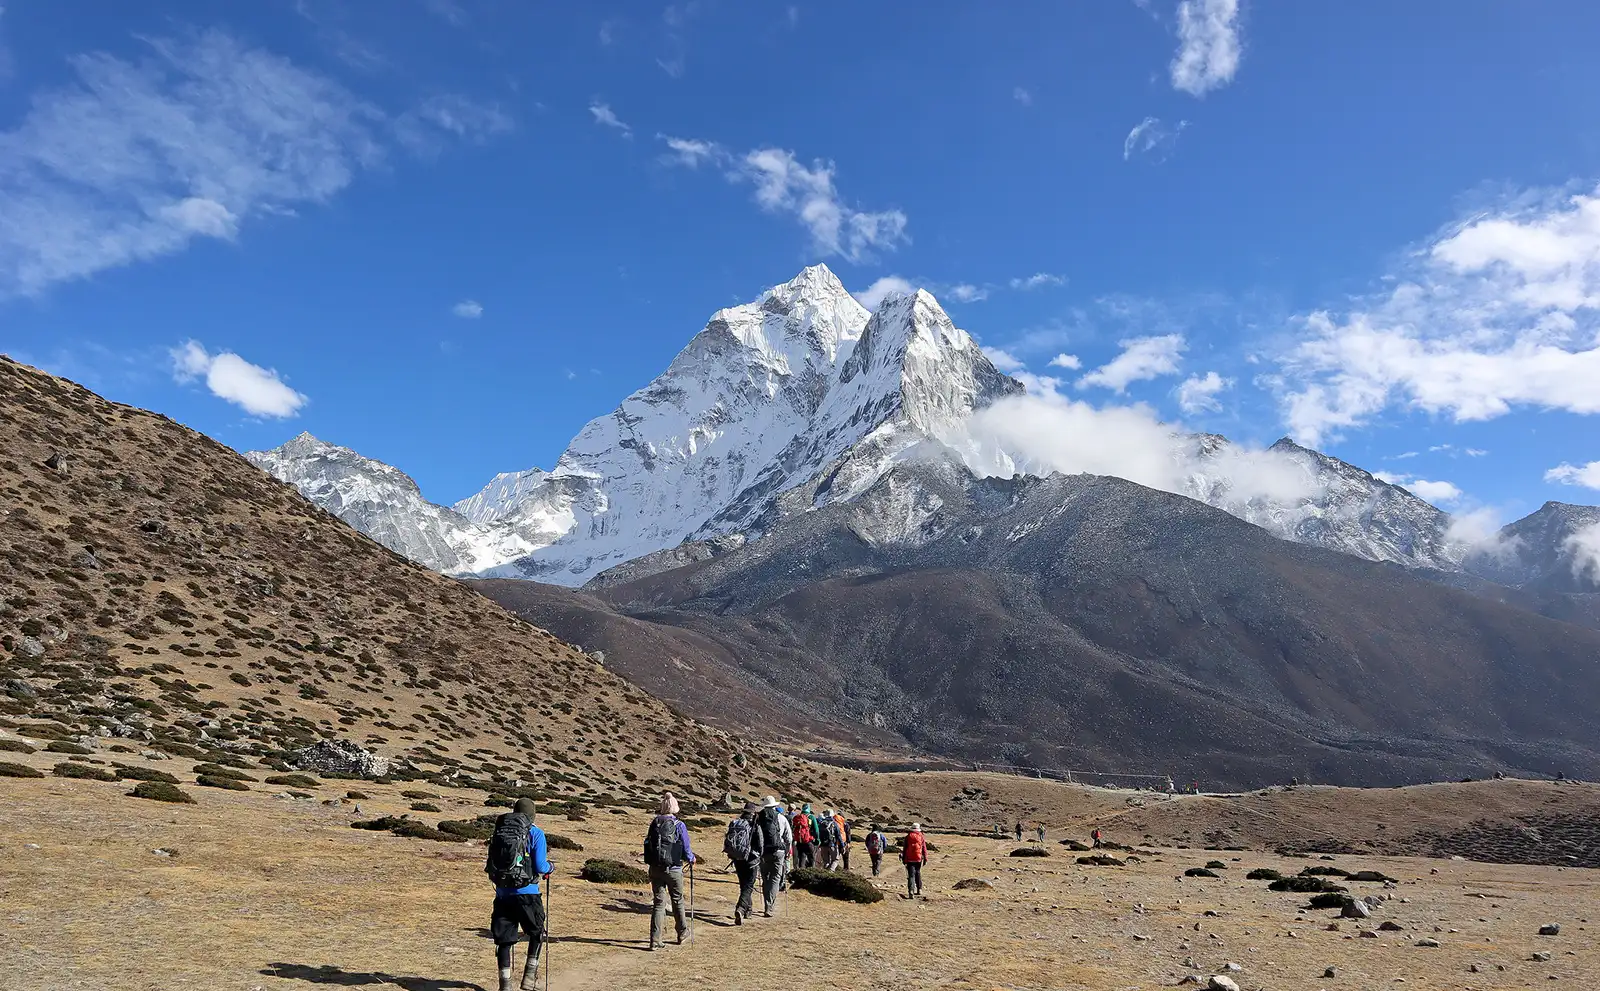 On the way to Everest Base Camp